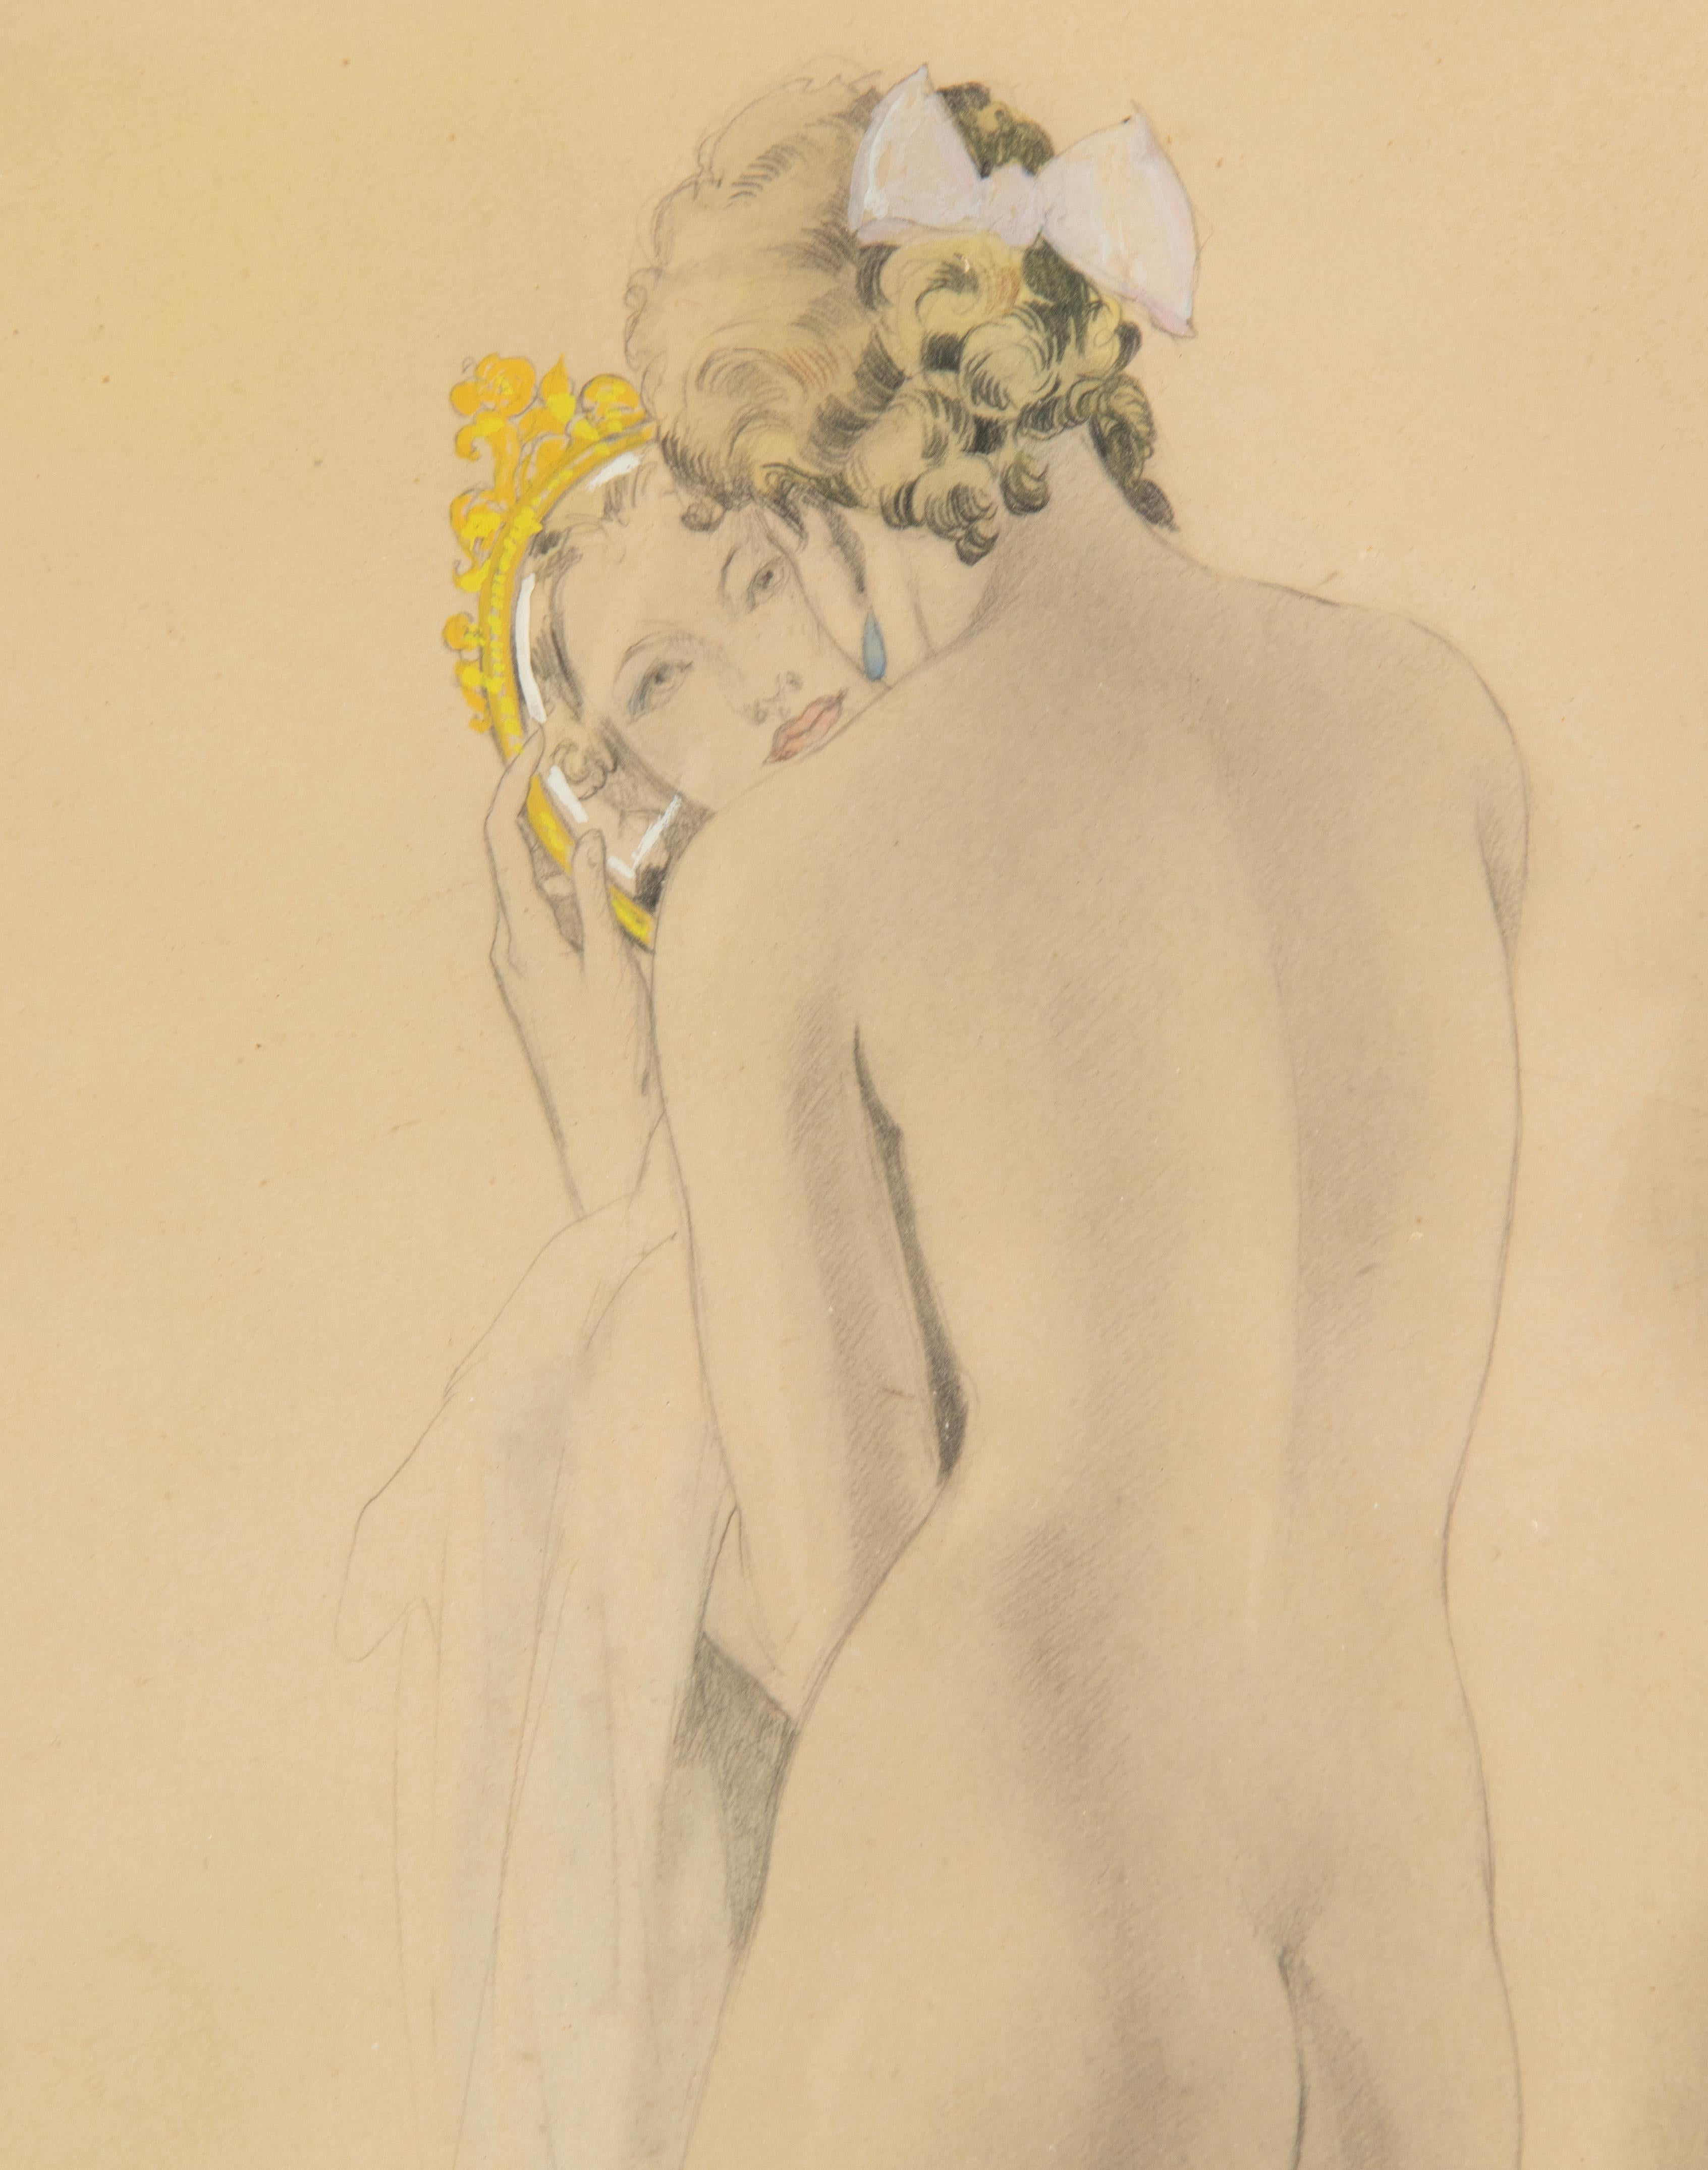 Pair of Art Deco Period Erotic Drawings / Watercolours by Umberto Brunelleschi For Sale 2